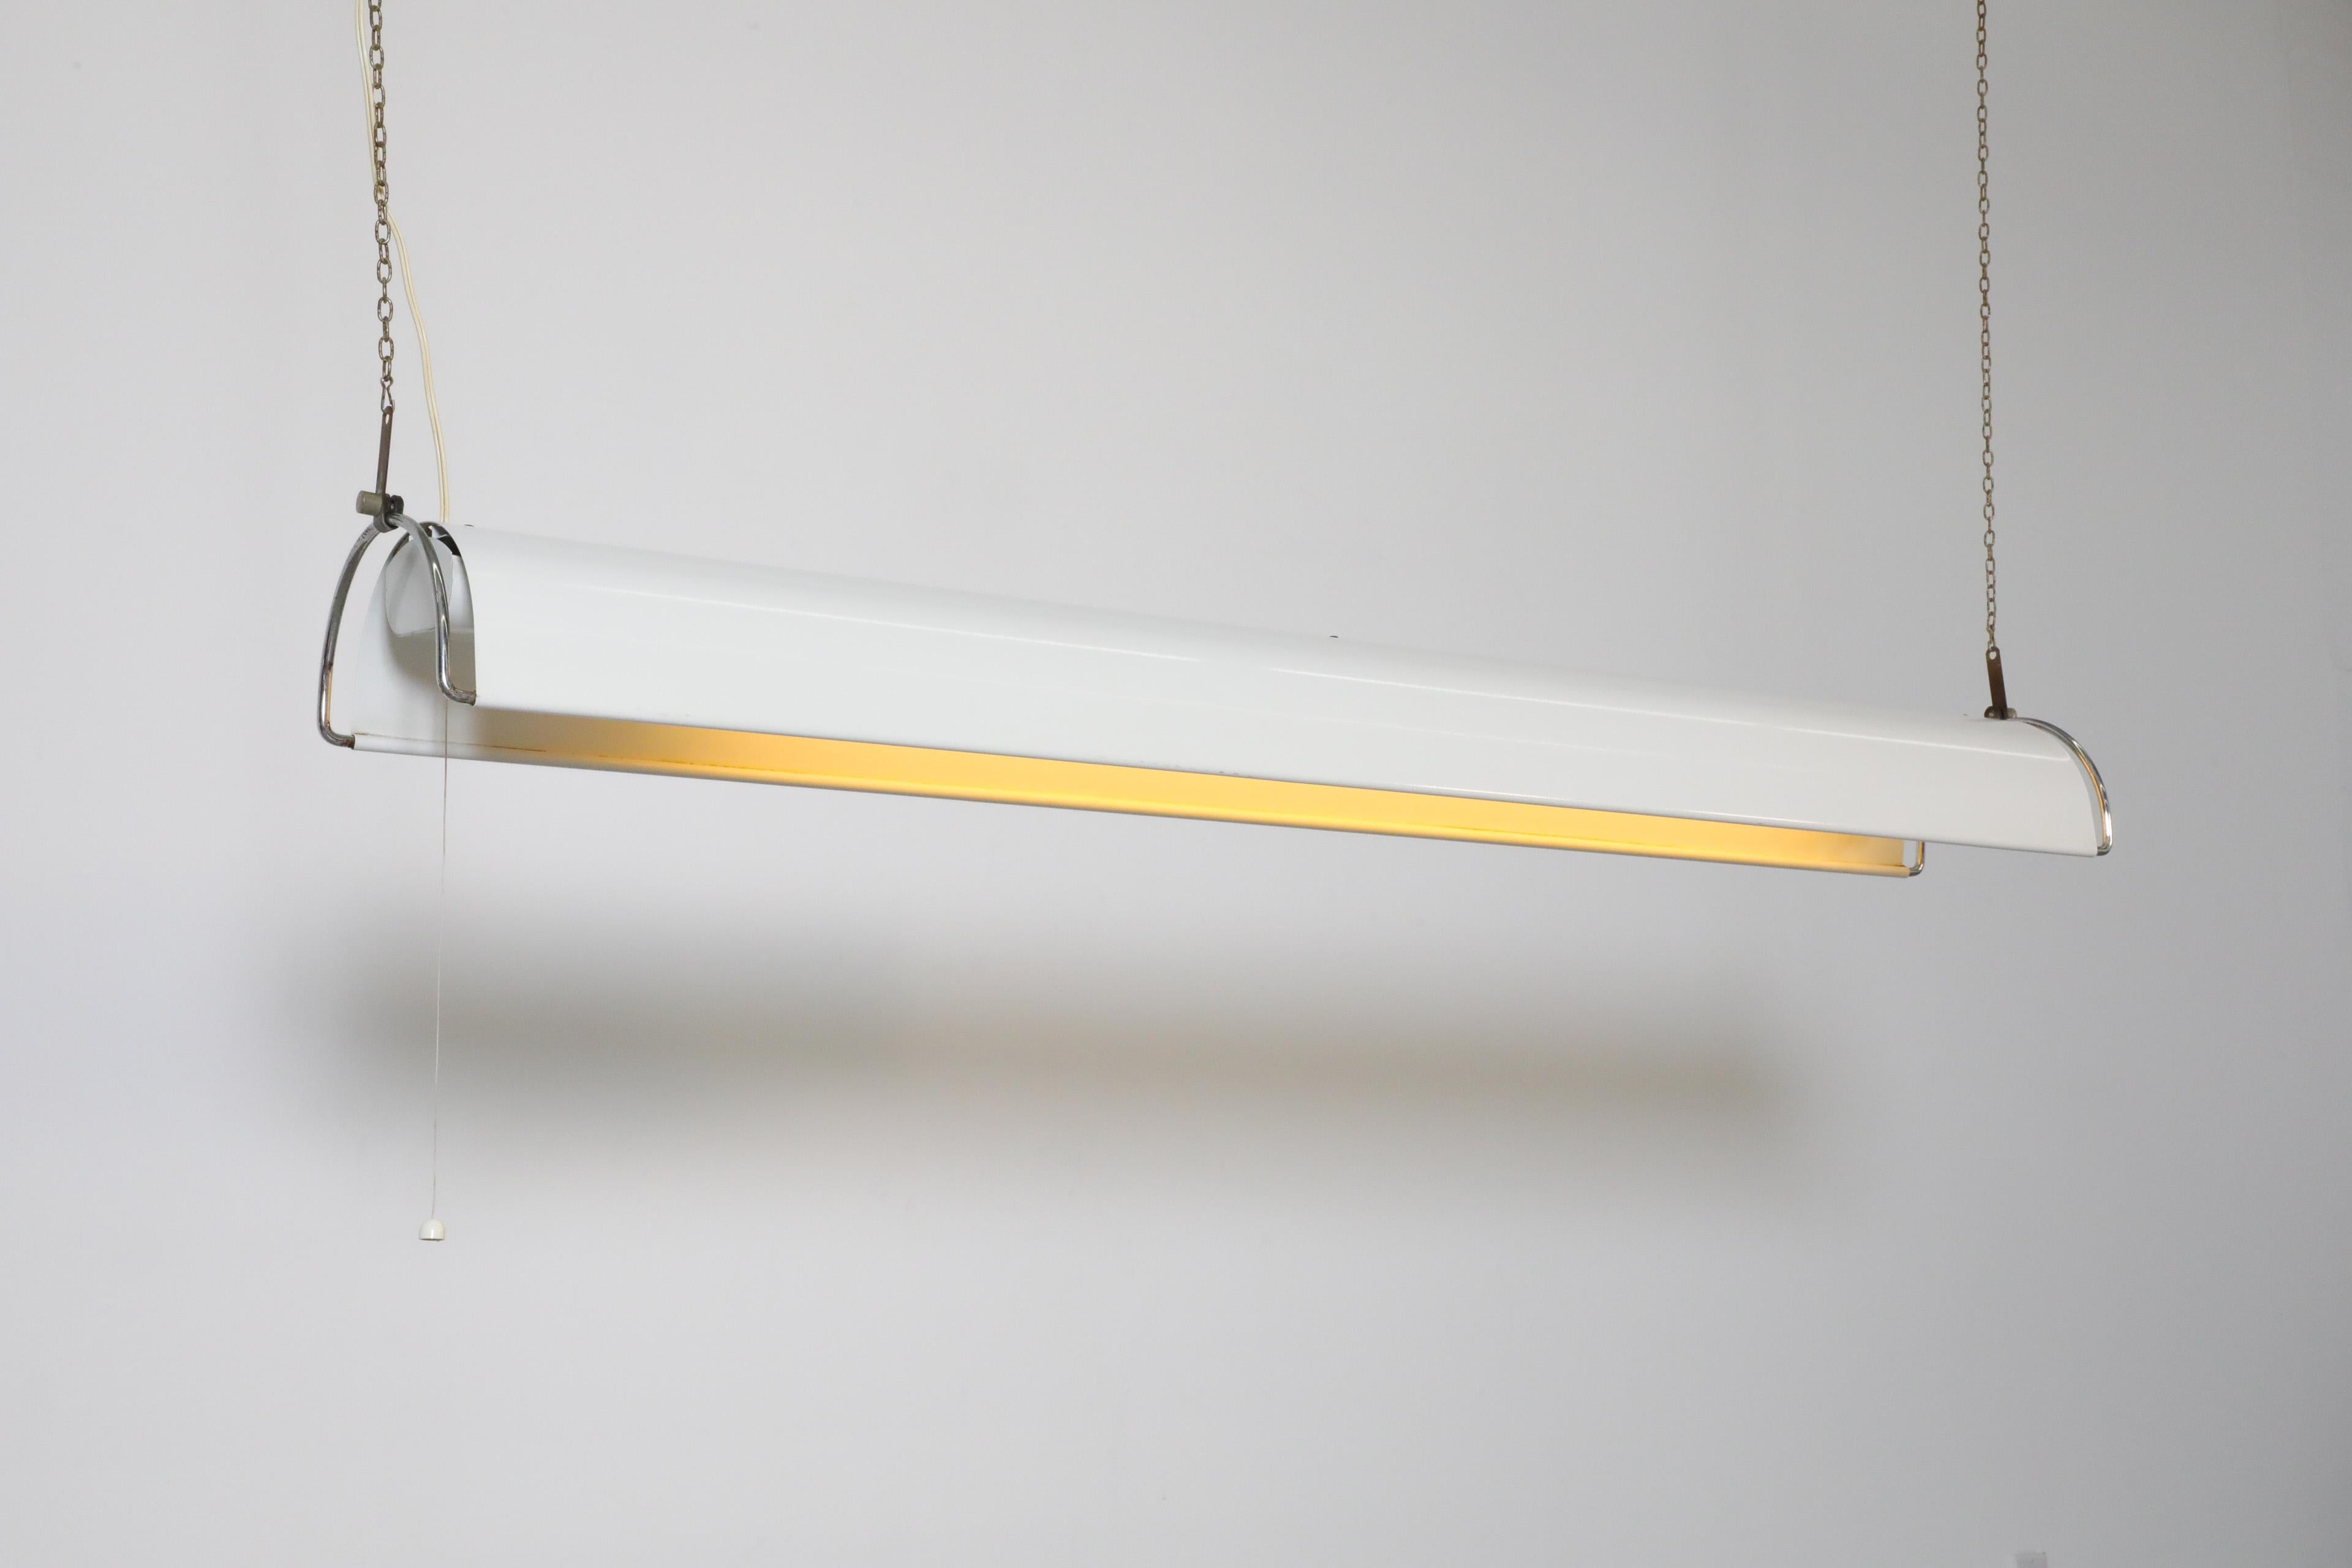 Vintage, Fagerhult manufactured, industrial hanging shop lamp with white enameled curved shade, chrome frame and long fluorescent bulb. The lamp hangs suspended from two chains and has a decorative inner shade around the bulb. Operates with a pull